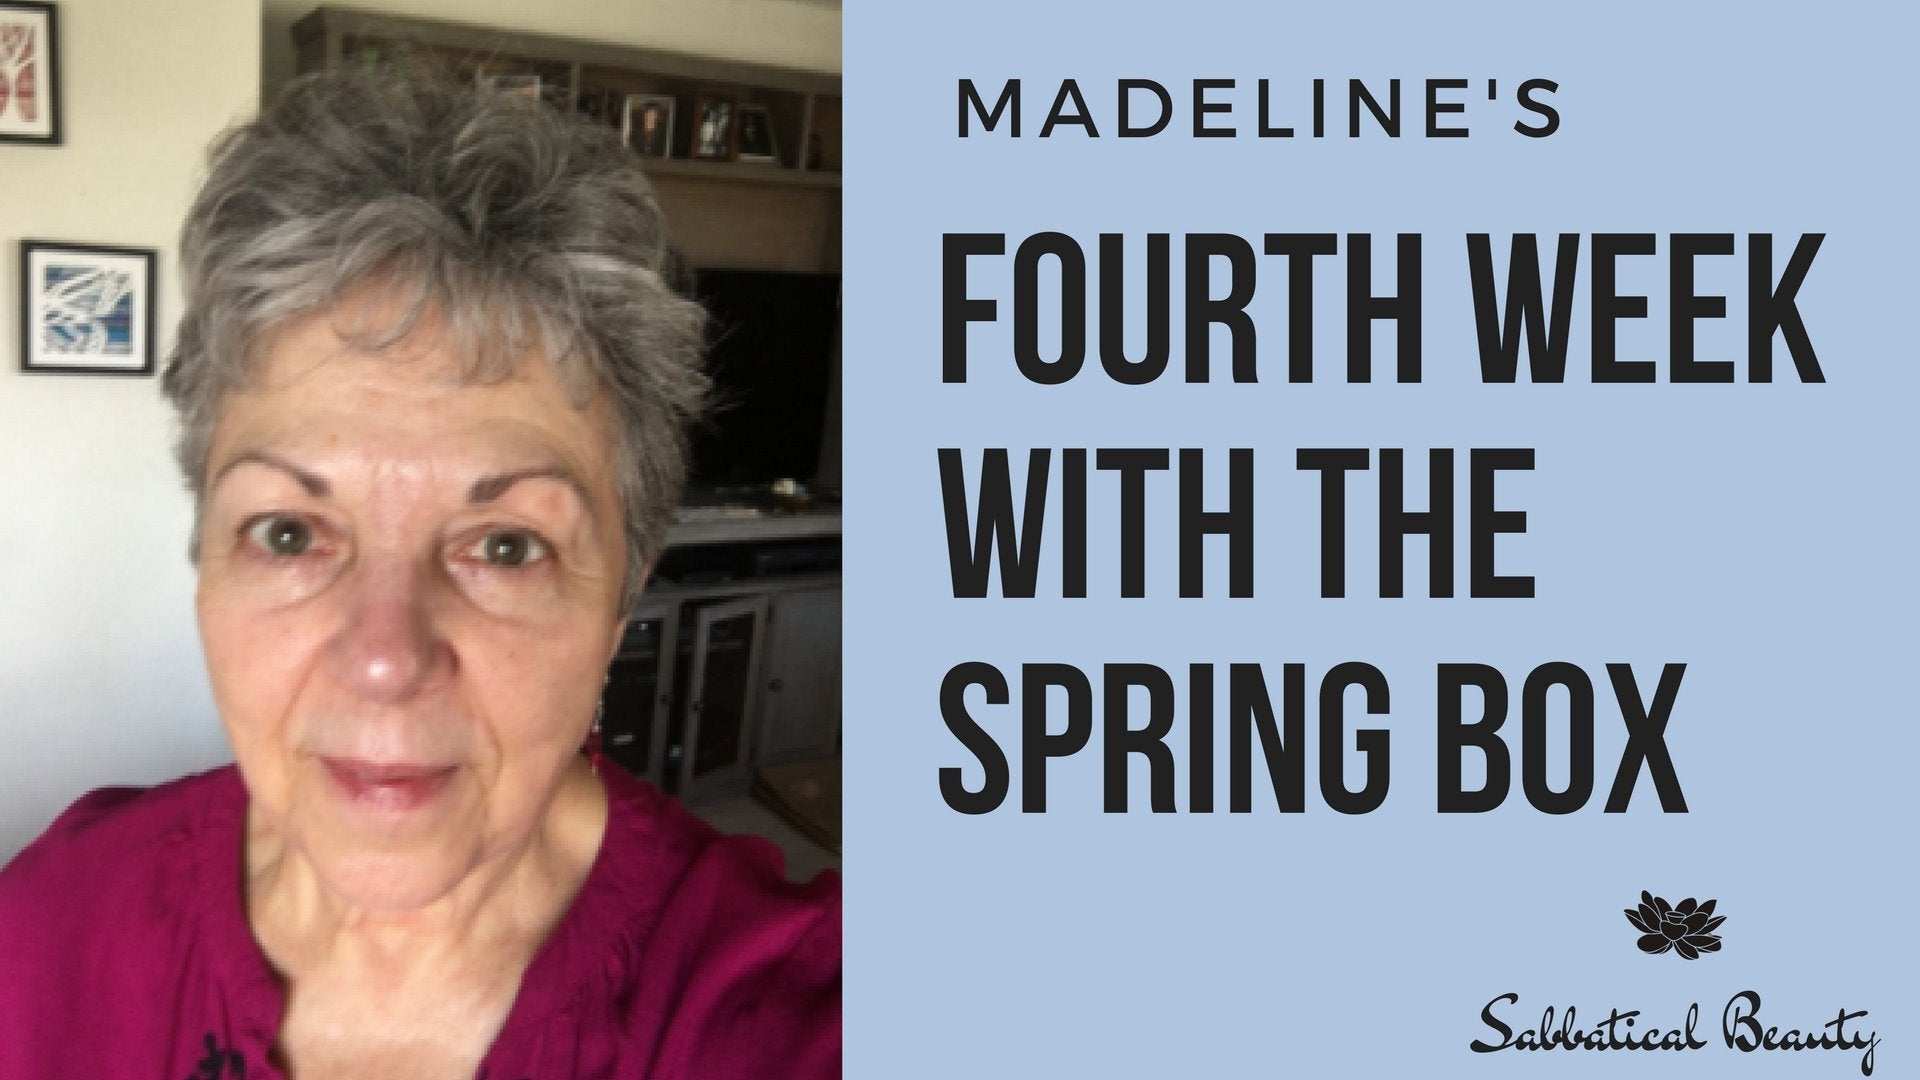 Madeline's Fourth Week With the Spring Box - Sabbatical Beauty